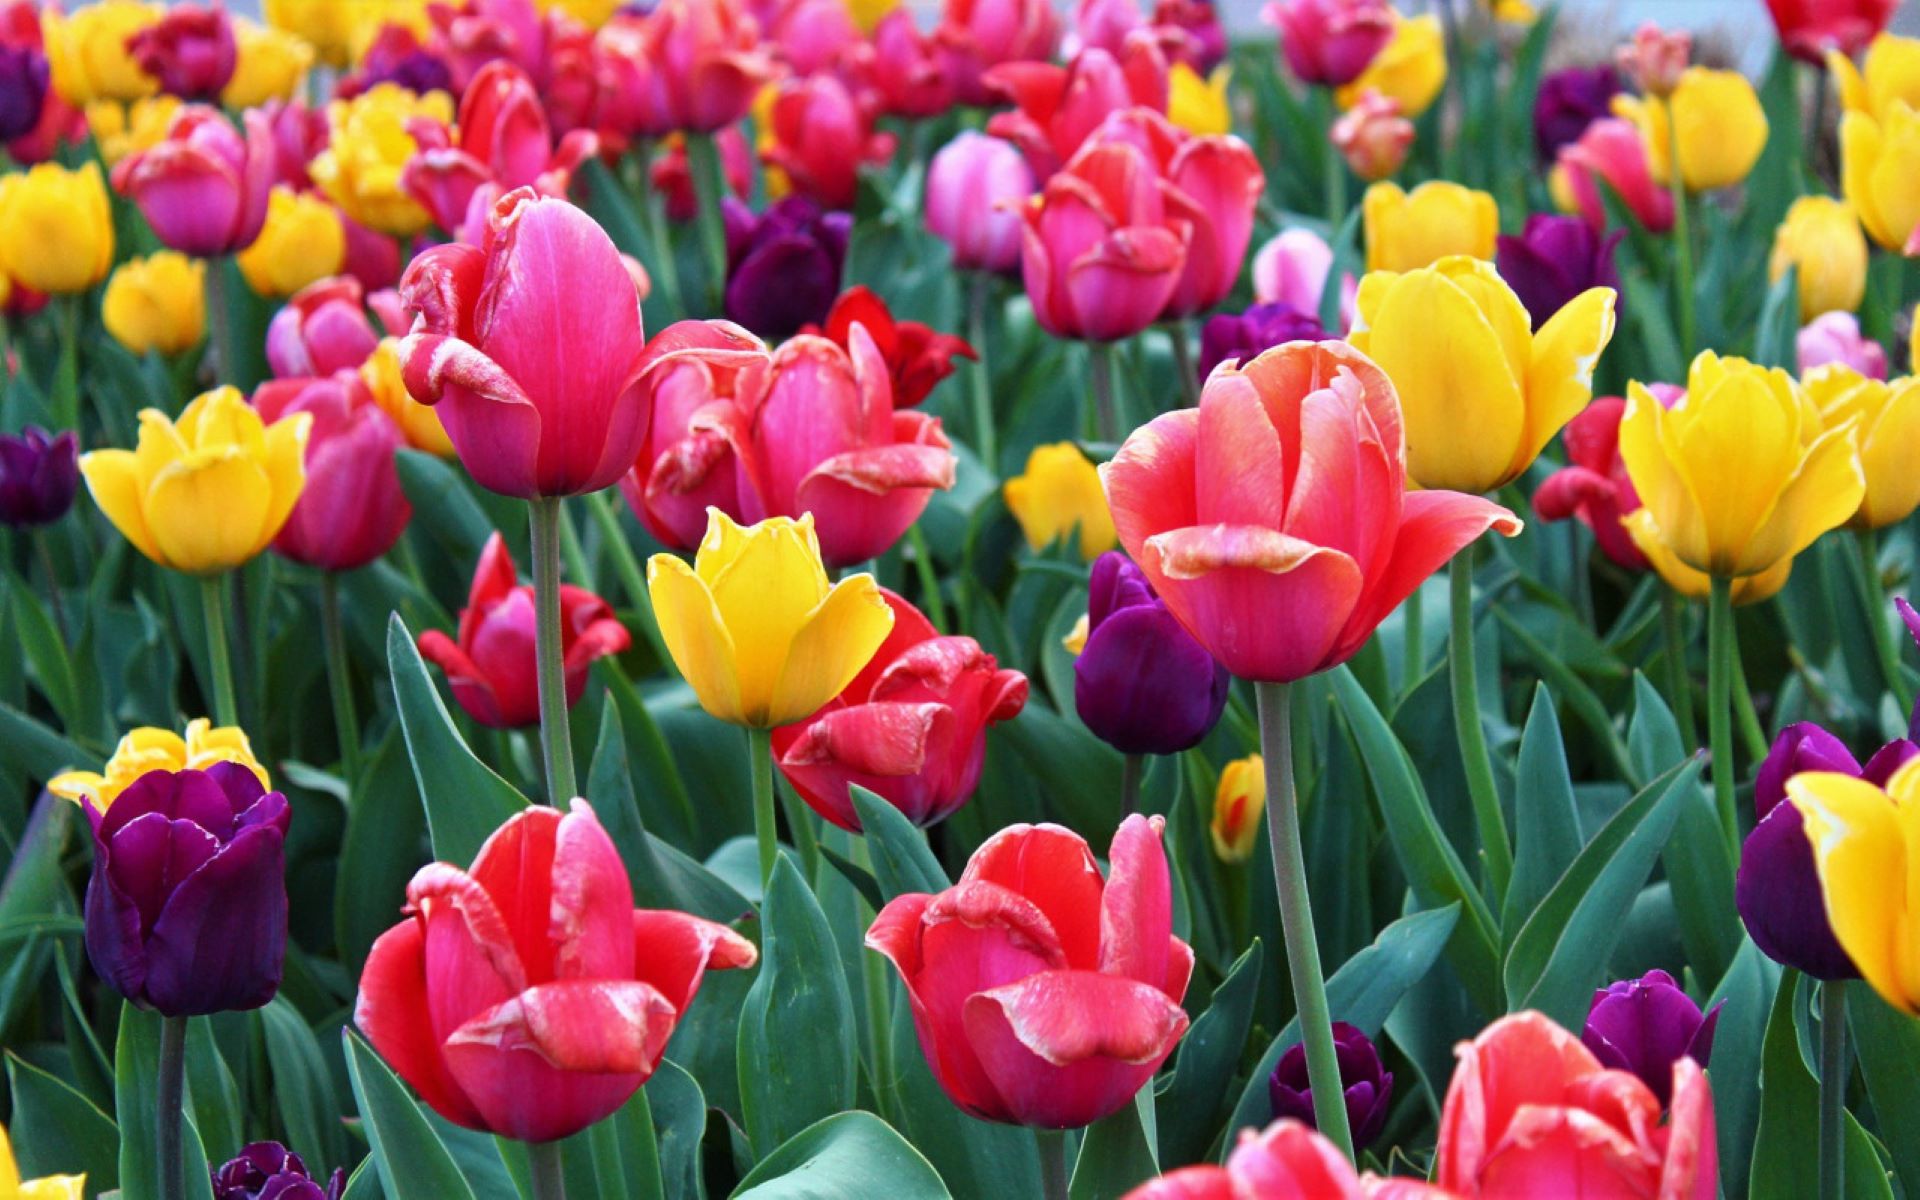 Multicolored tulips in the flower bed